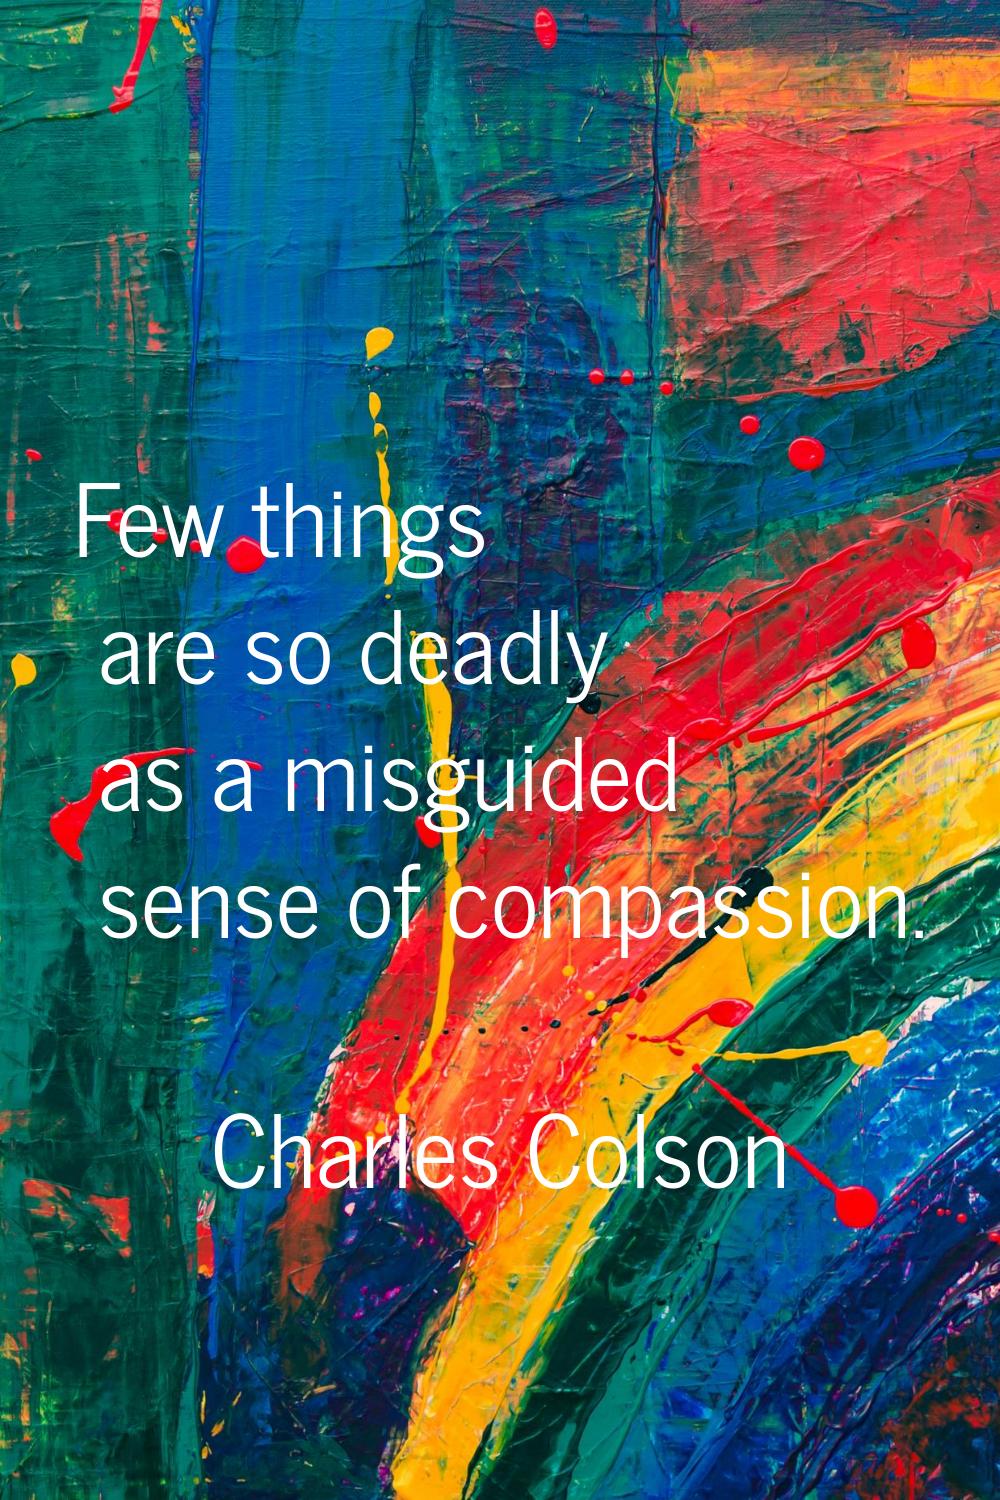 Few things are so deadly as a misguided sense of compassion.